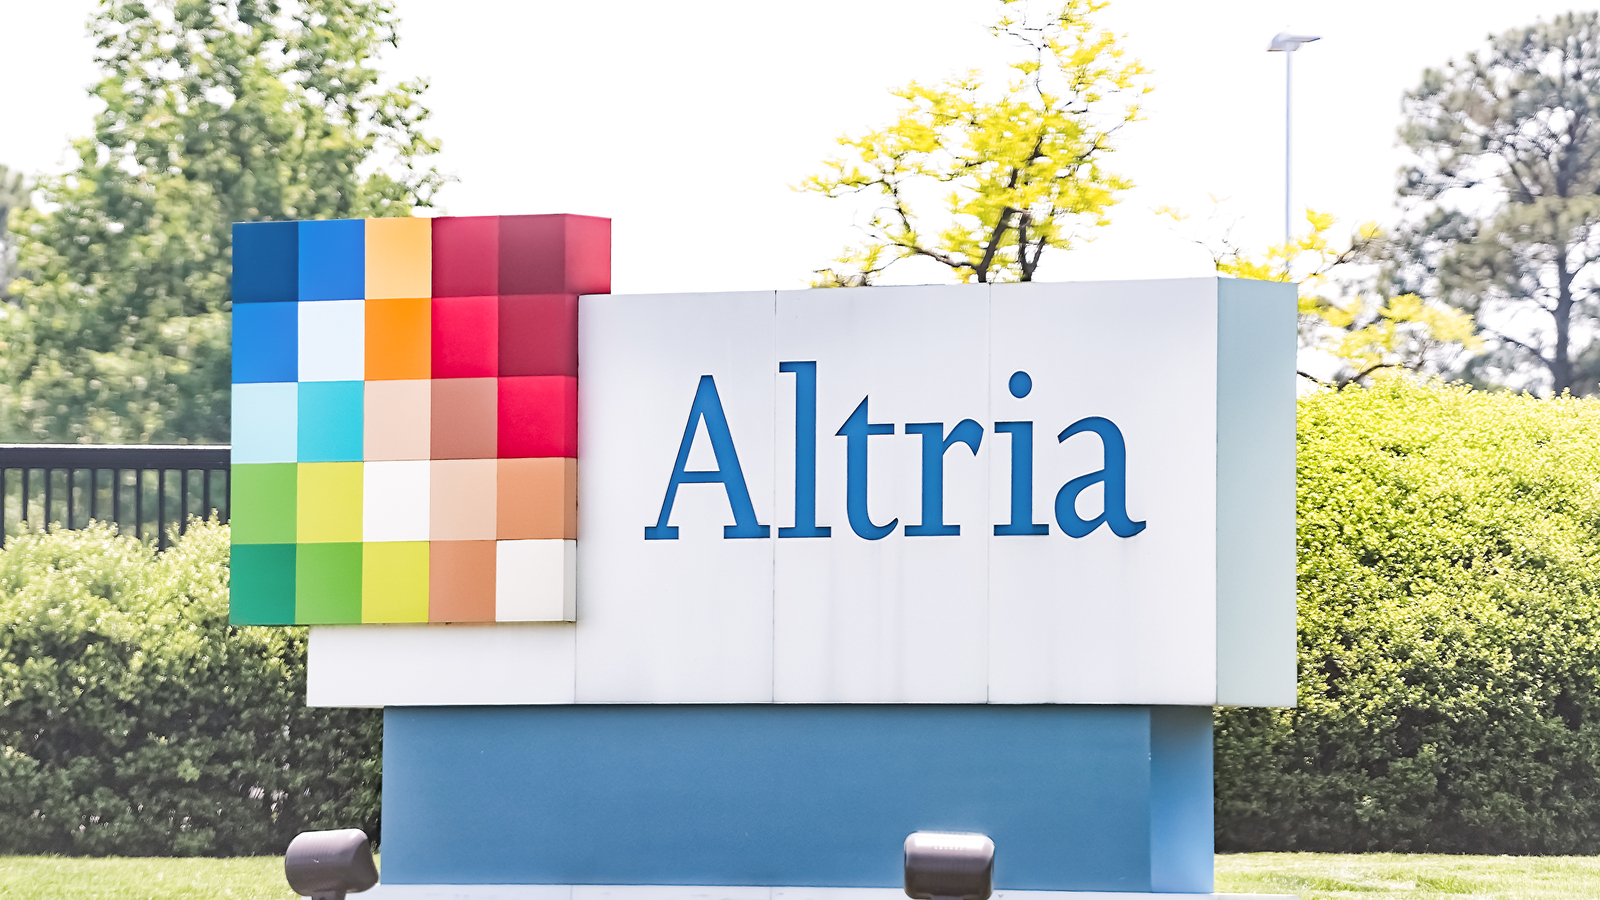 Altria office sign in Virginia capital city tobacco business closeup by road street representing MO stock.